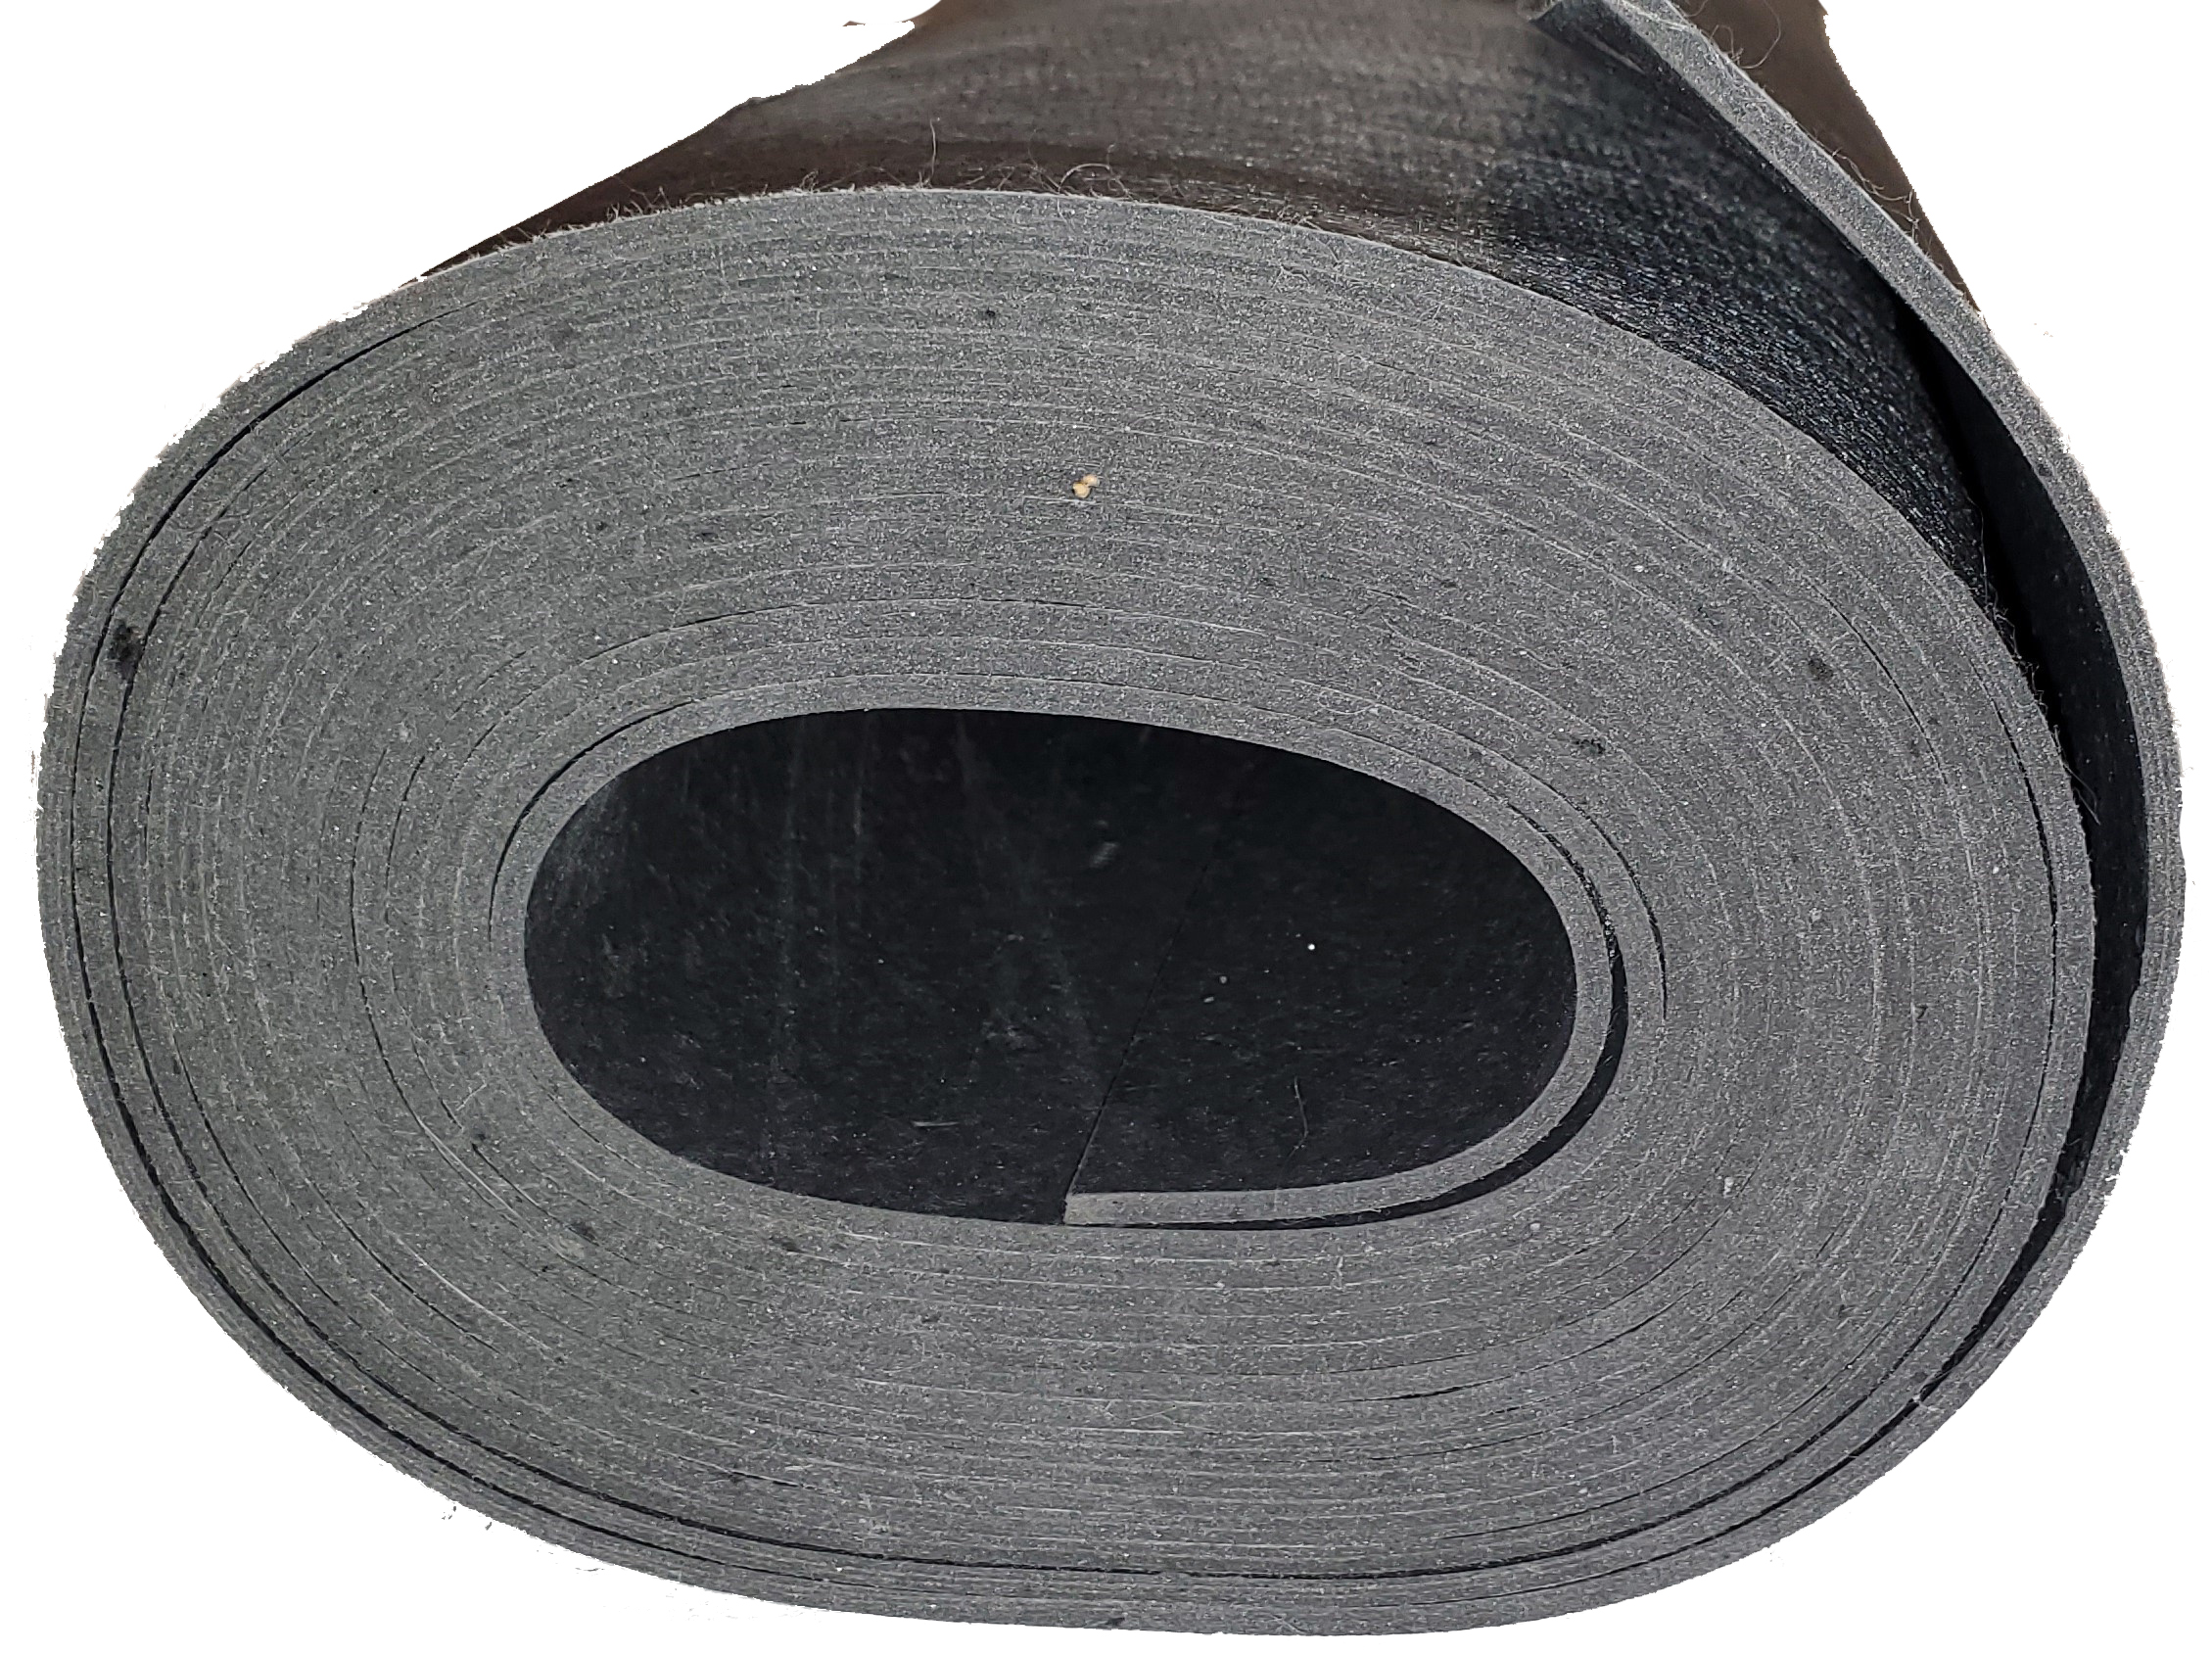 Noise Grabber Mass Loaded Vinyl 4.5’ x 4’ Made in the USA 1 LB MLV Soundproofing Barrier 18 SF Best Quality 